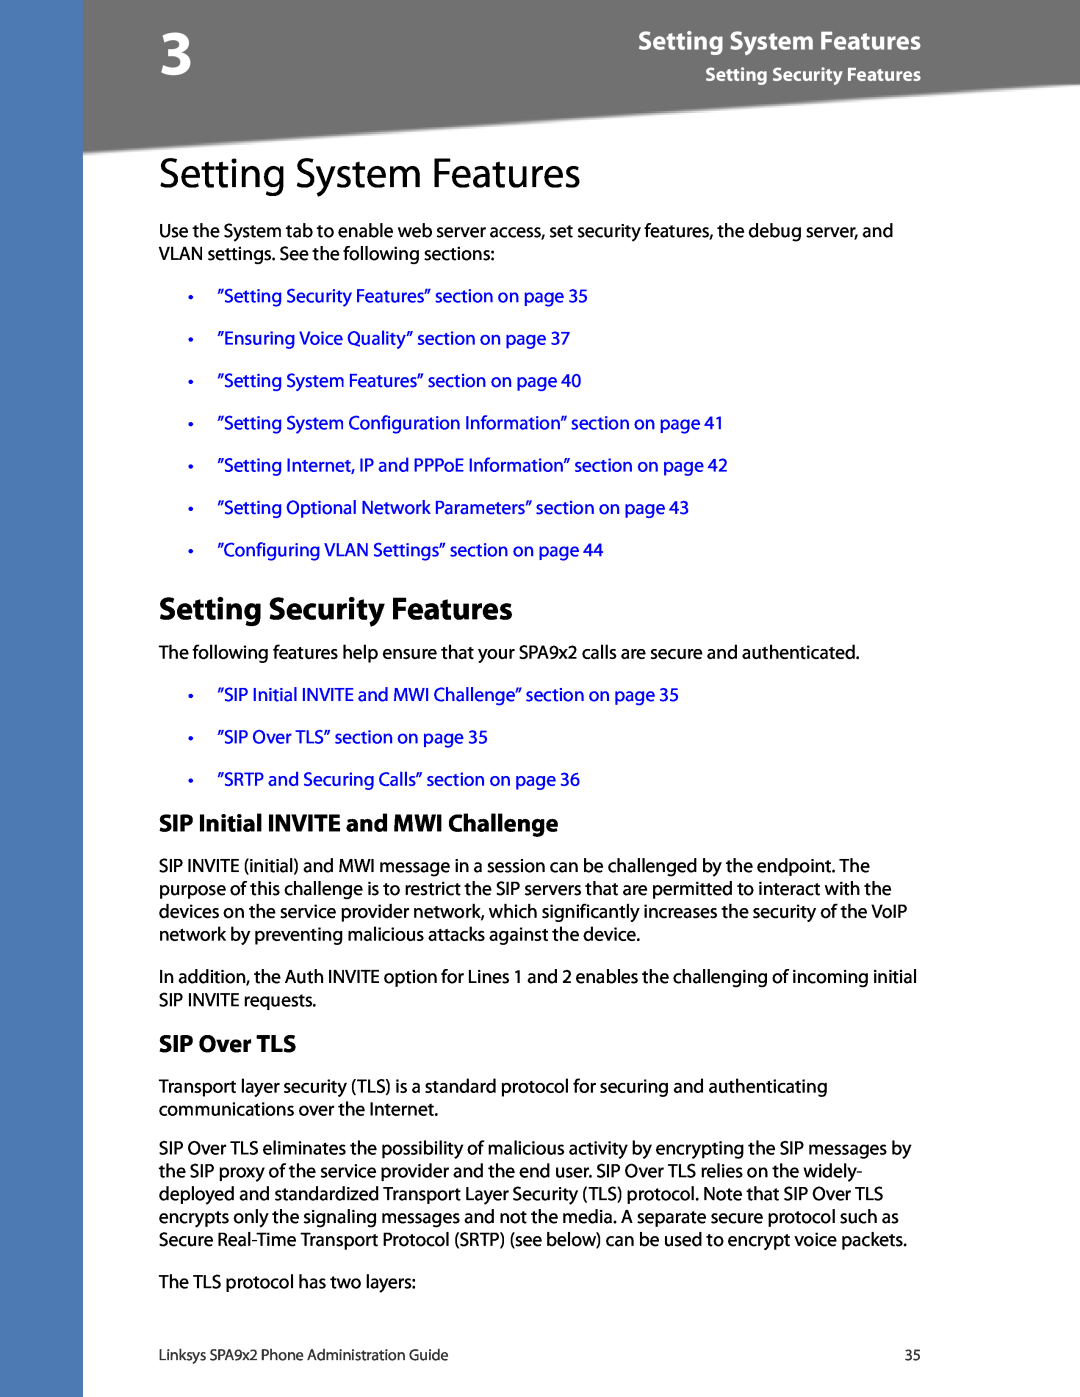 Linksys SPA932 Setting System Features, Setting Security Features, SIP Initial INVITE and MWI Challenge, SIP Over TLS 